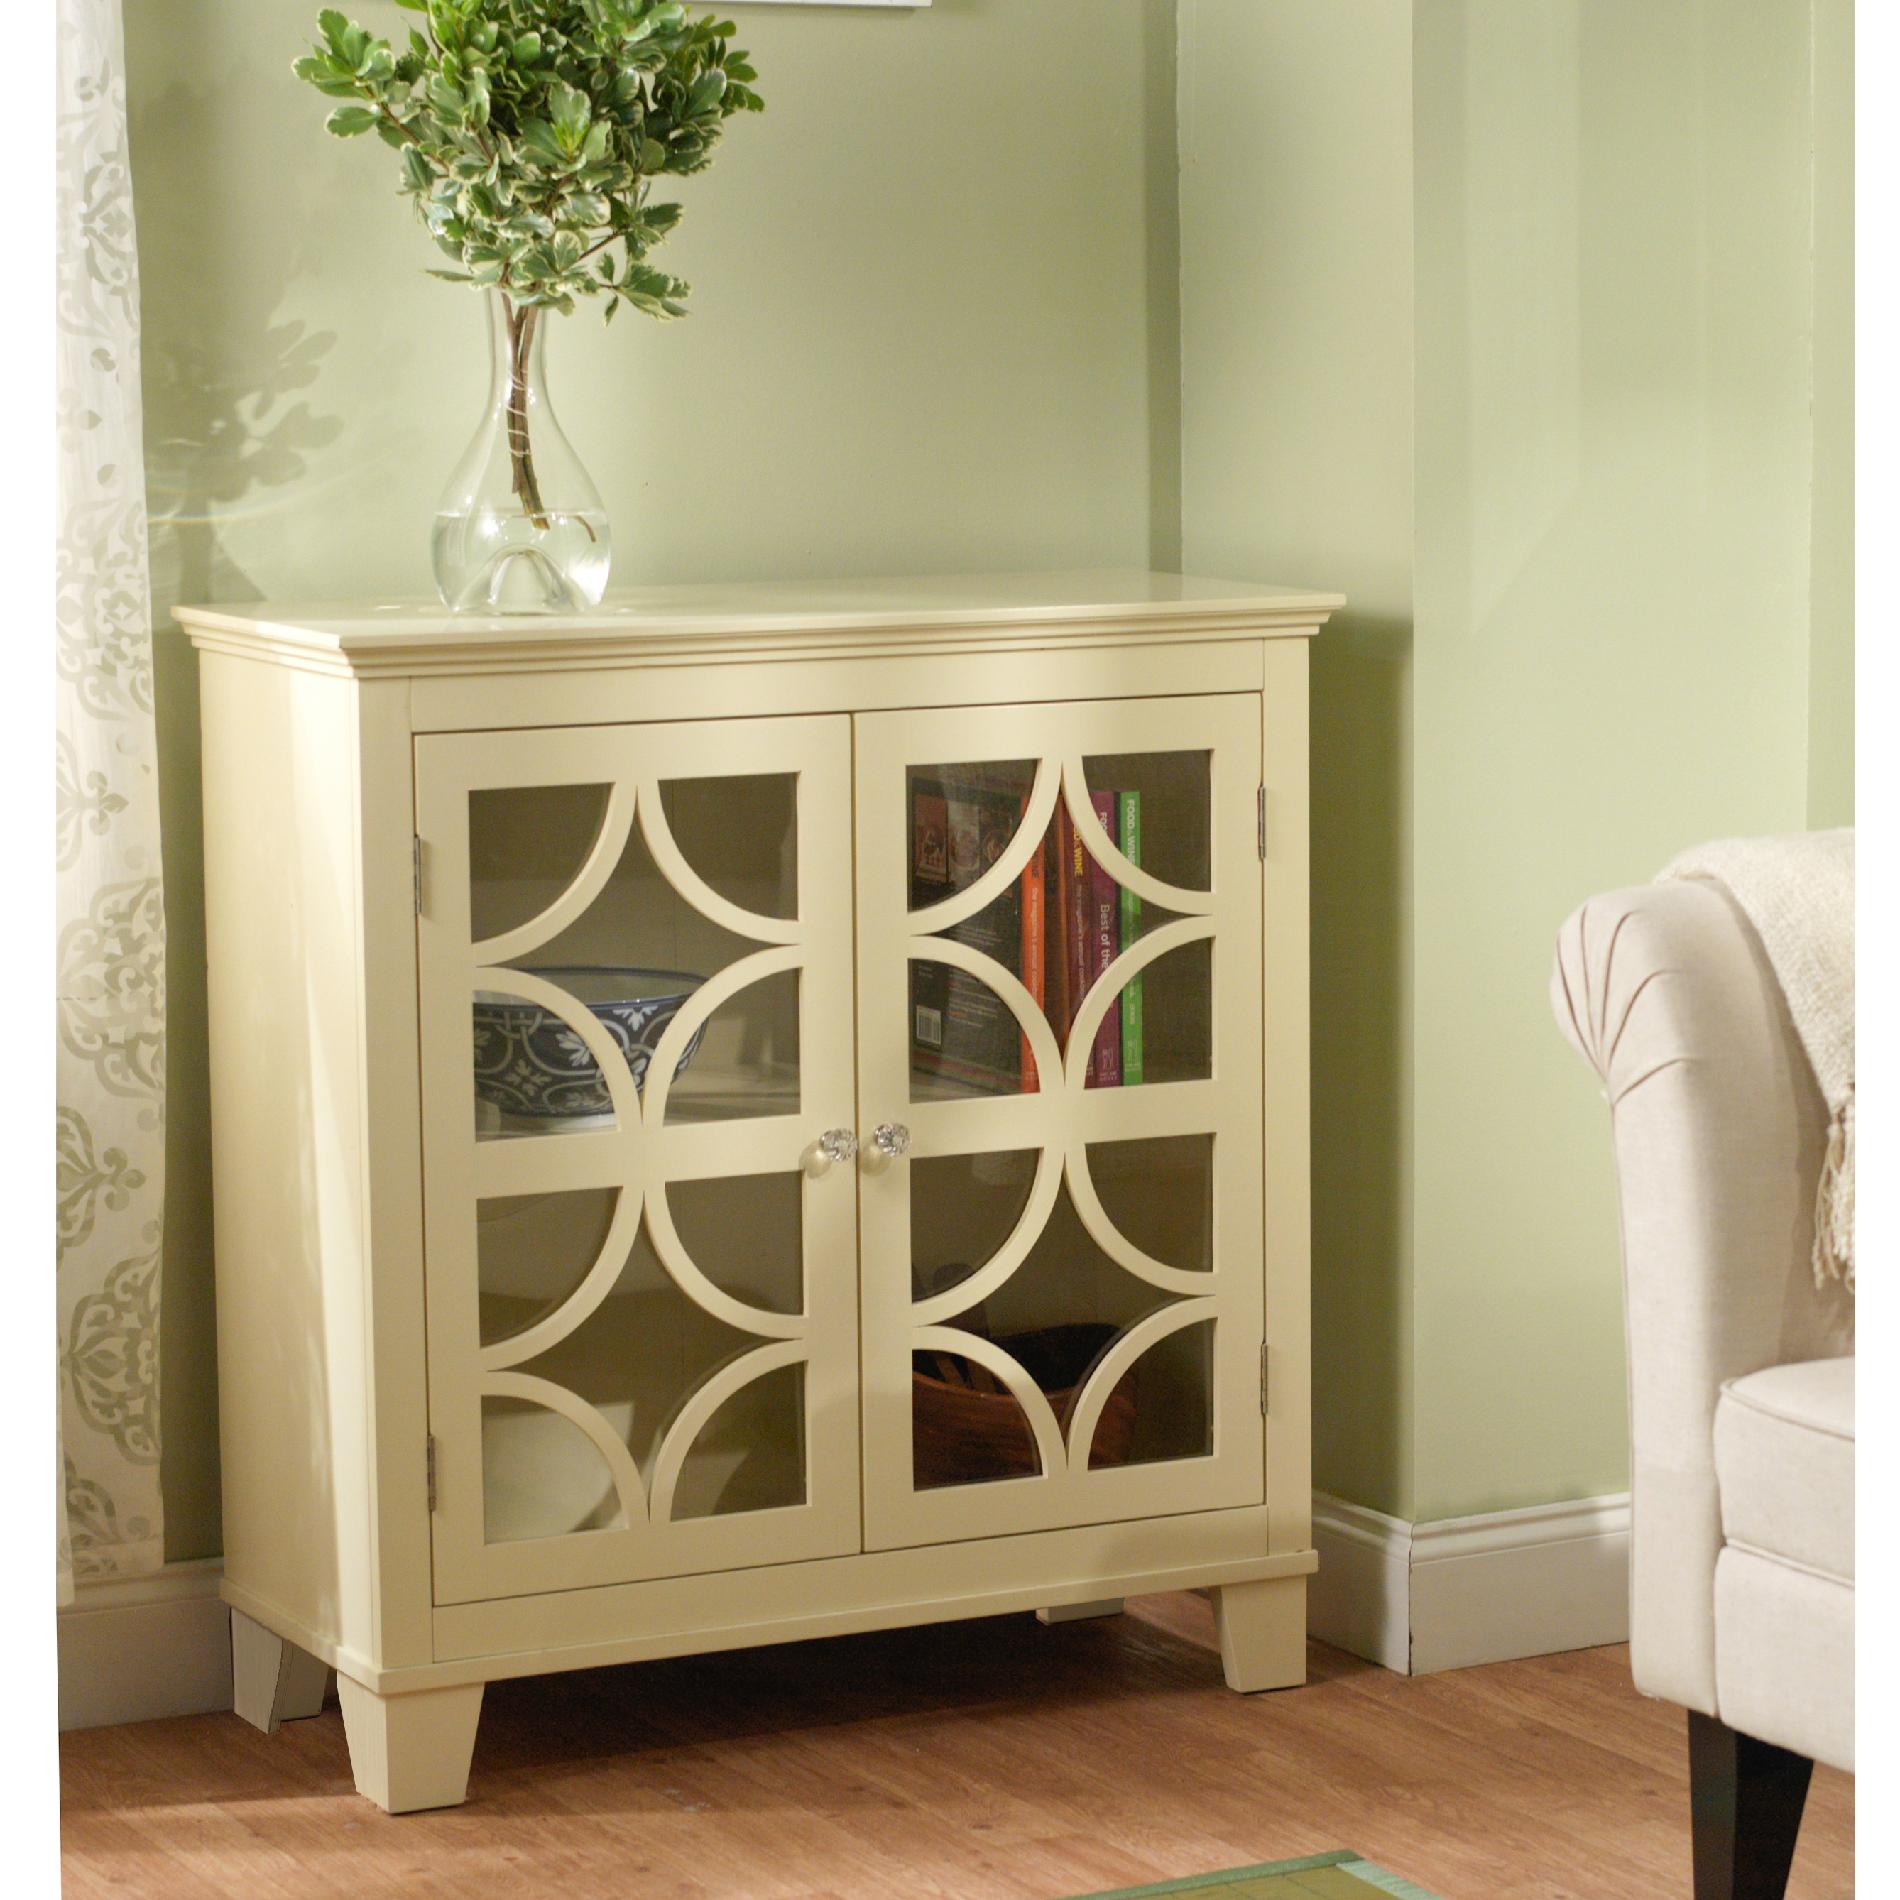 Sydney cabinet in ivory color